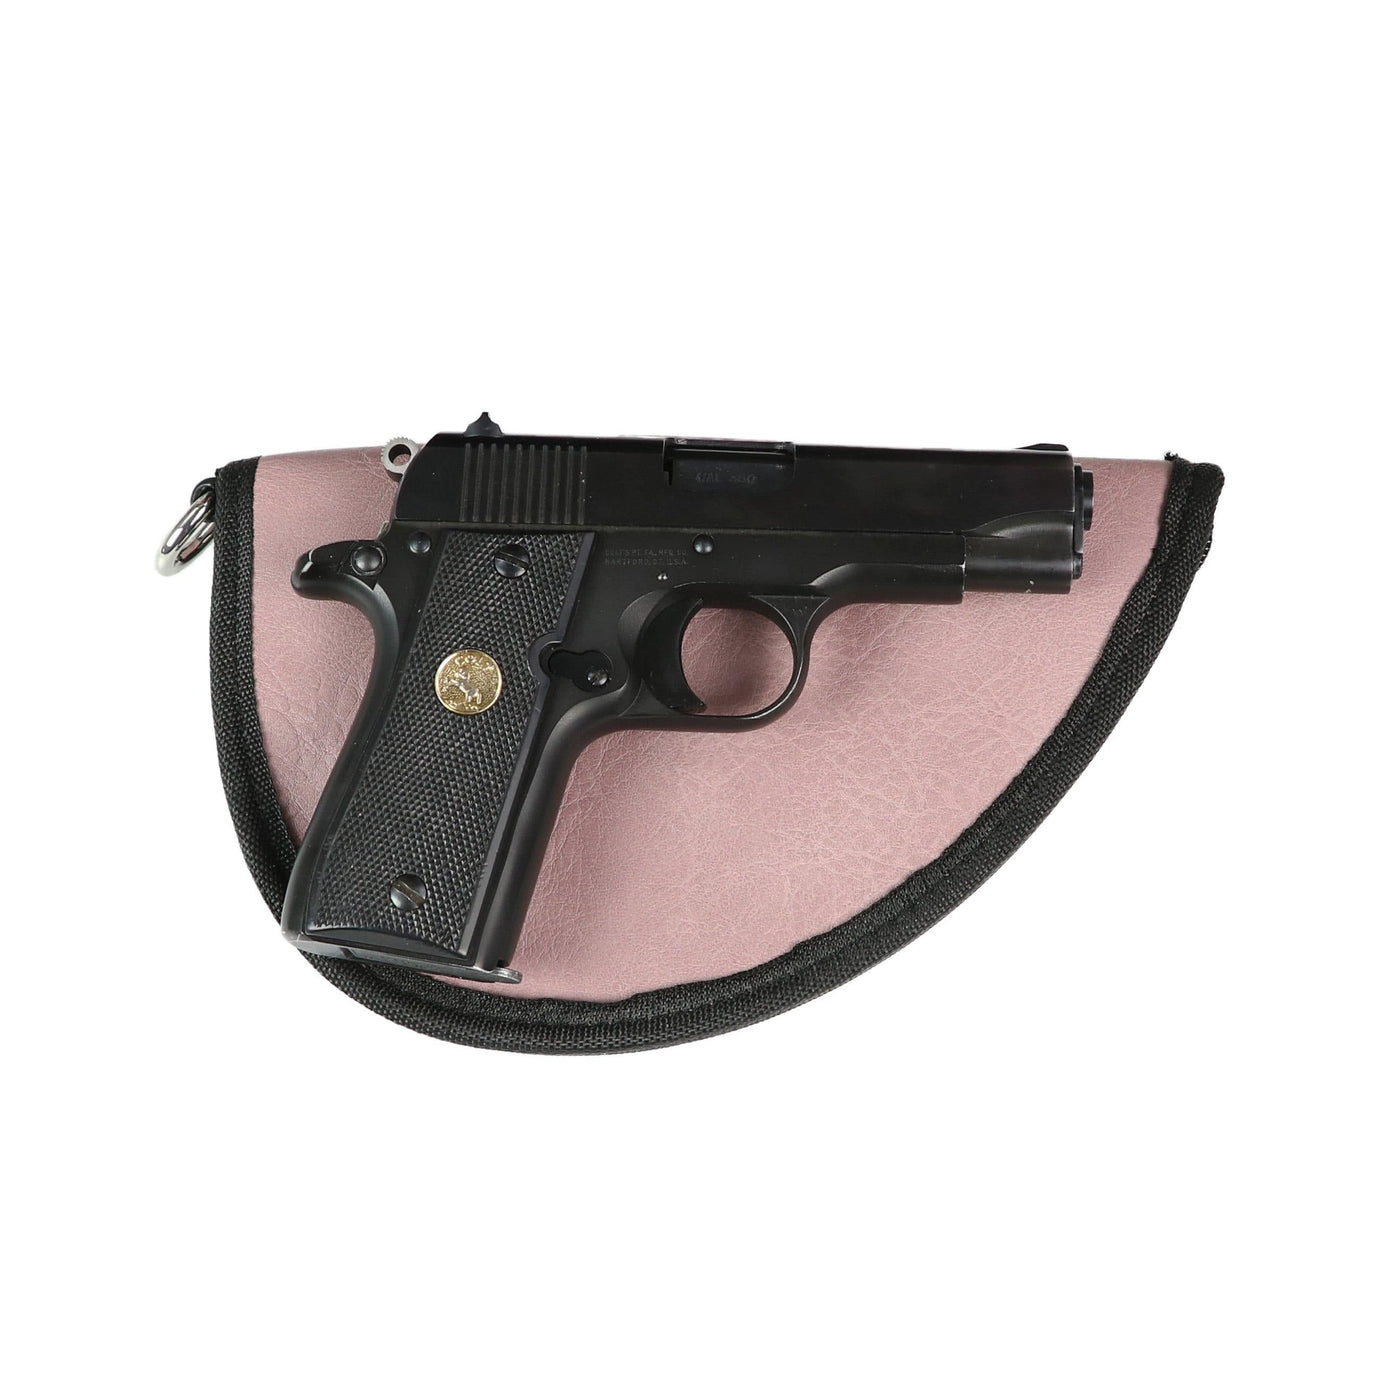 Small Gun Case -  Lady Conceal -  Cases -  beautifull gun case -  lady conceal gun case -  leather gun case -  lady conceal leather gun case